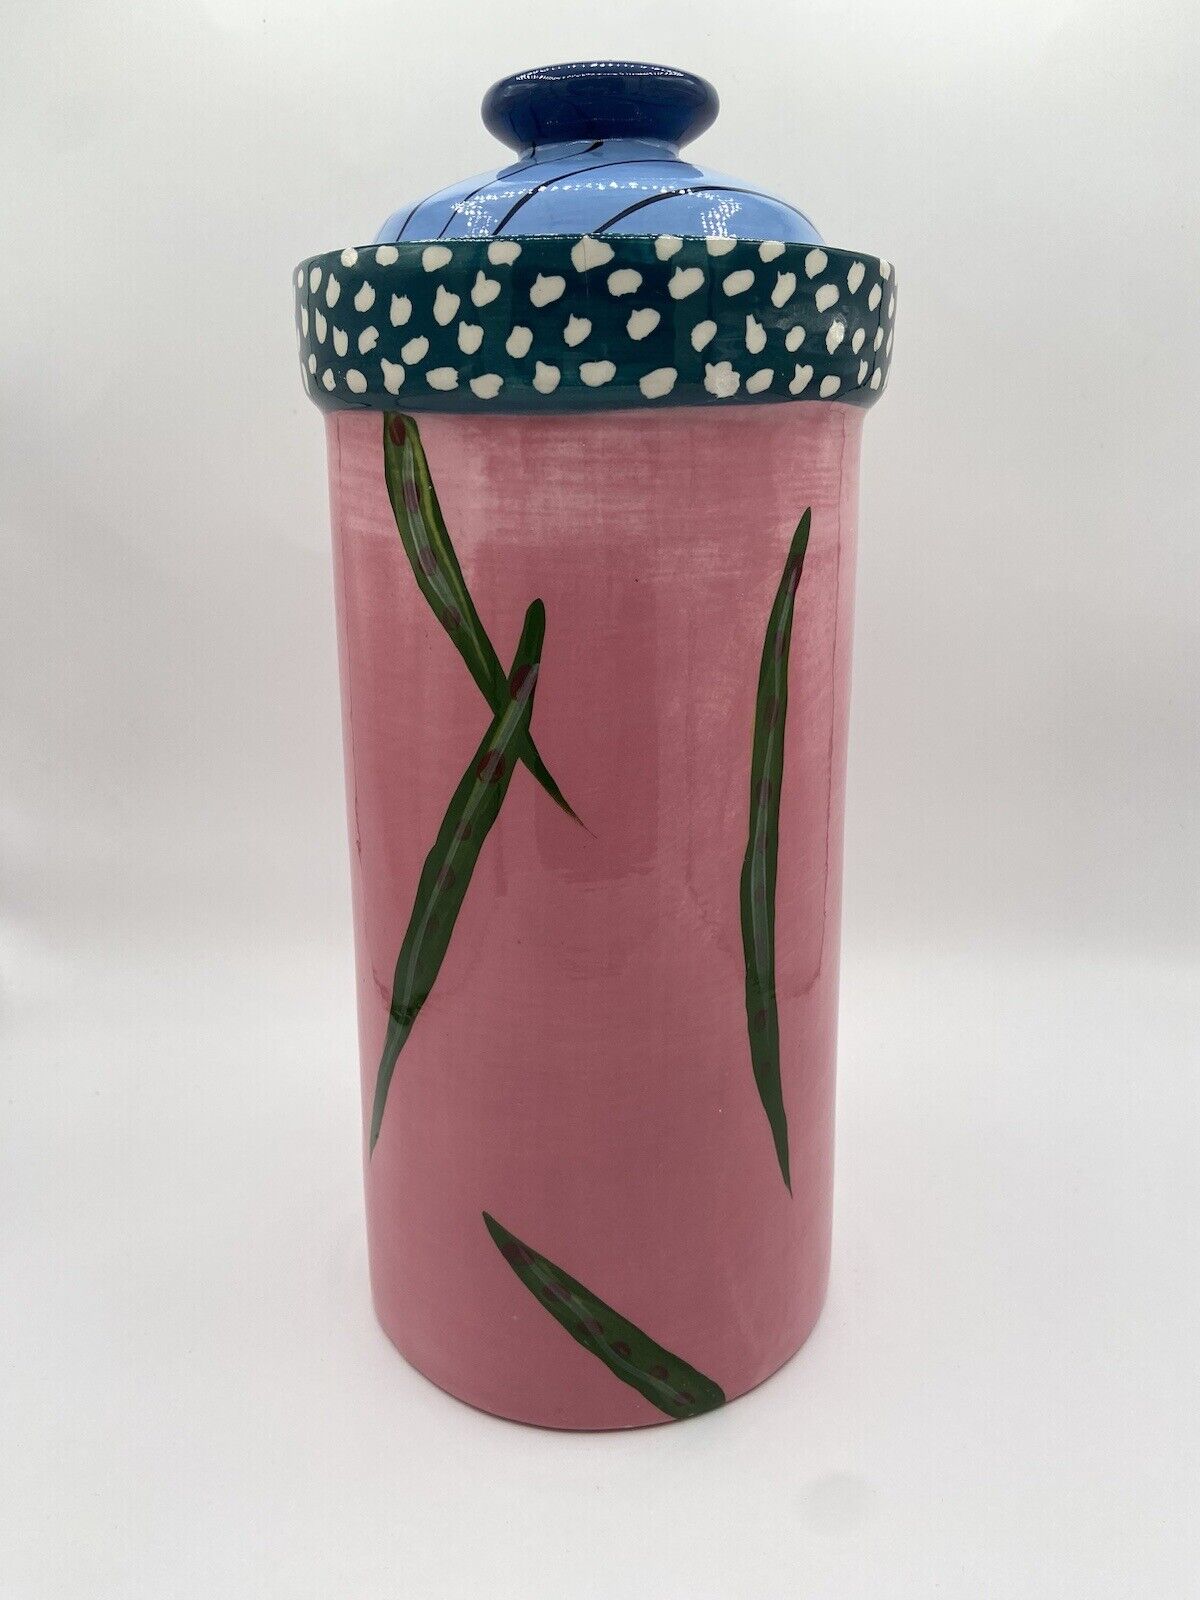 Droll Designs 12” Pottery Canister - Handmade & Hand Painted